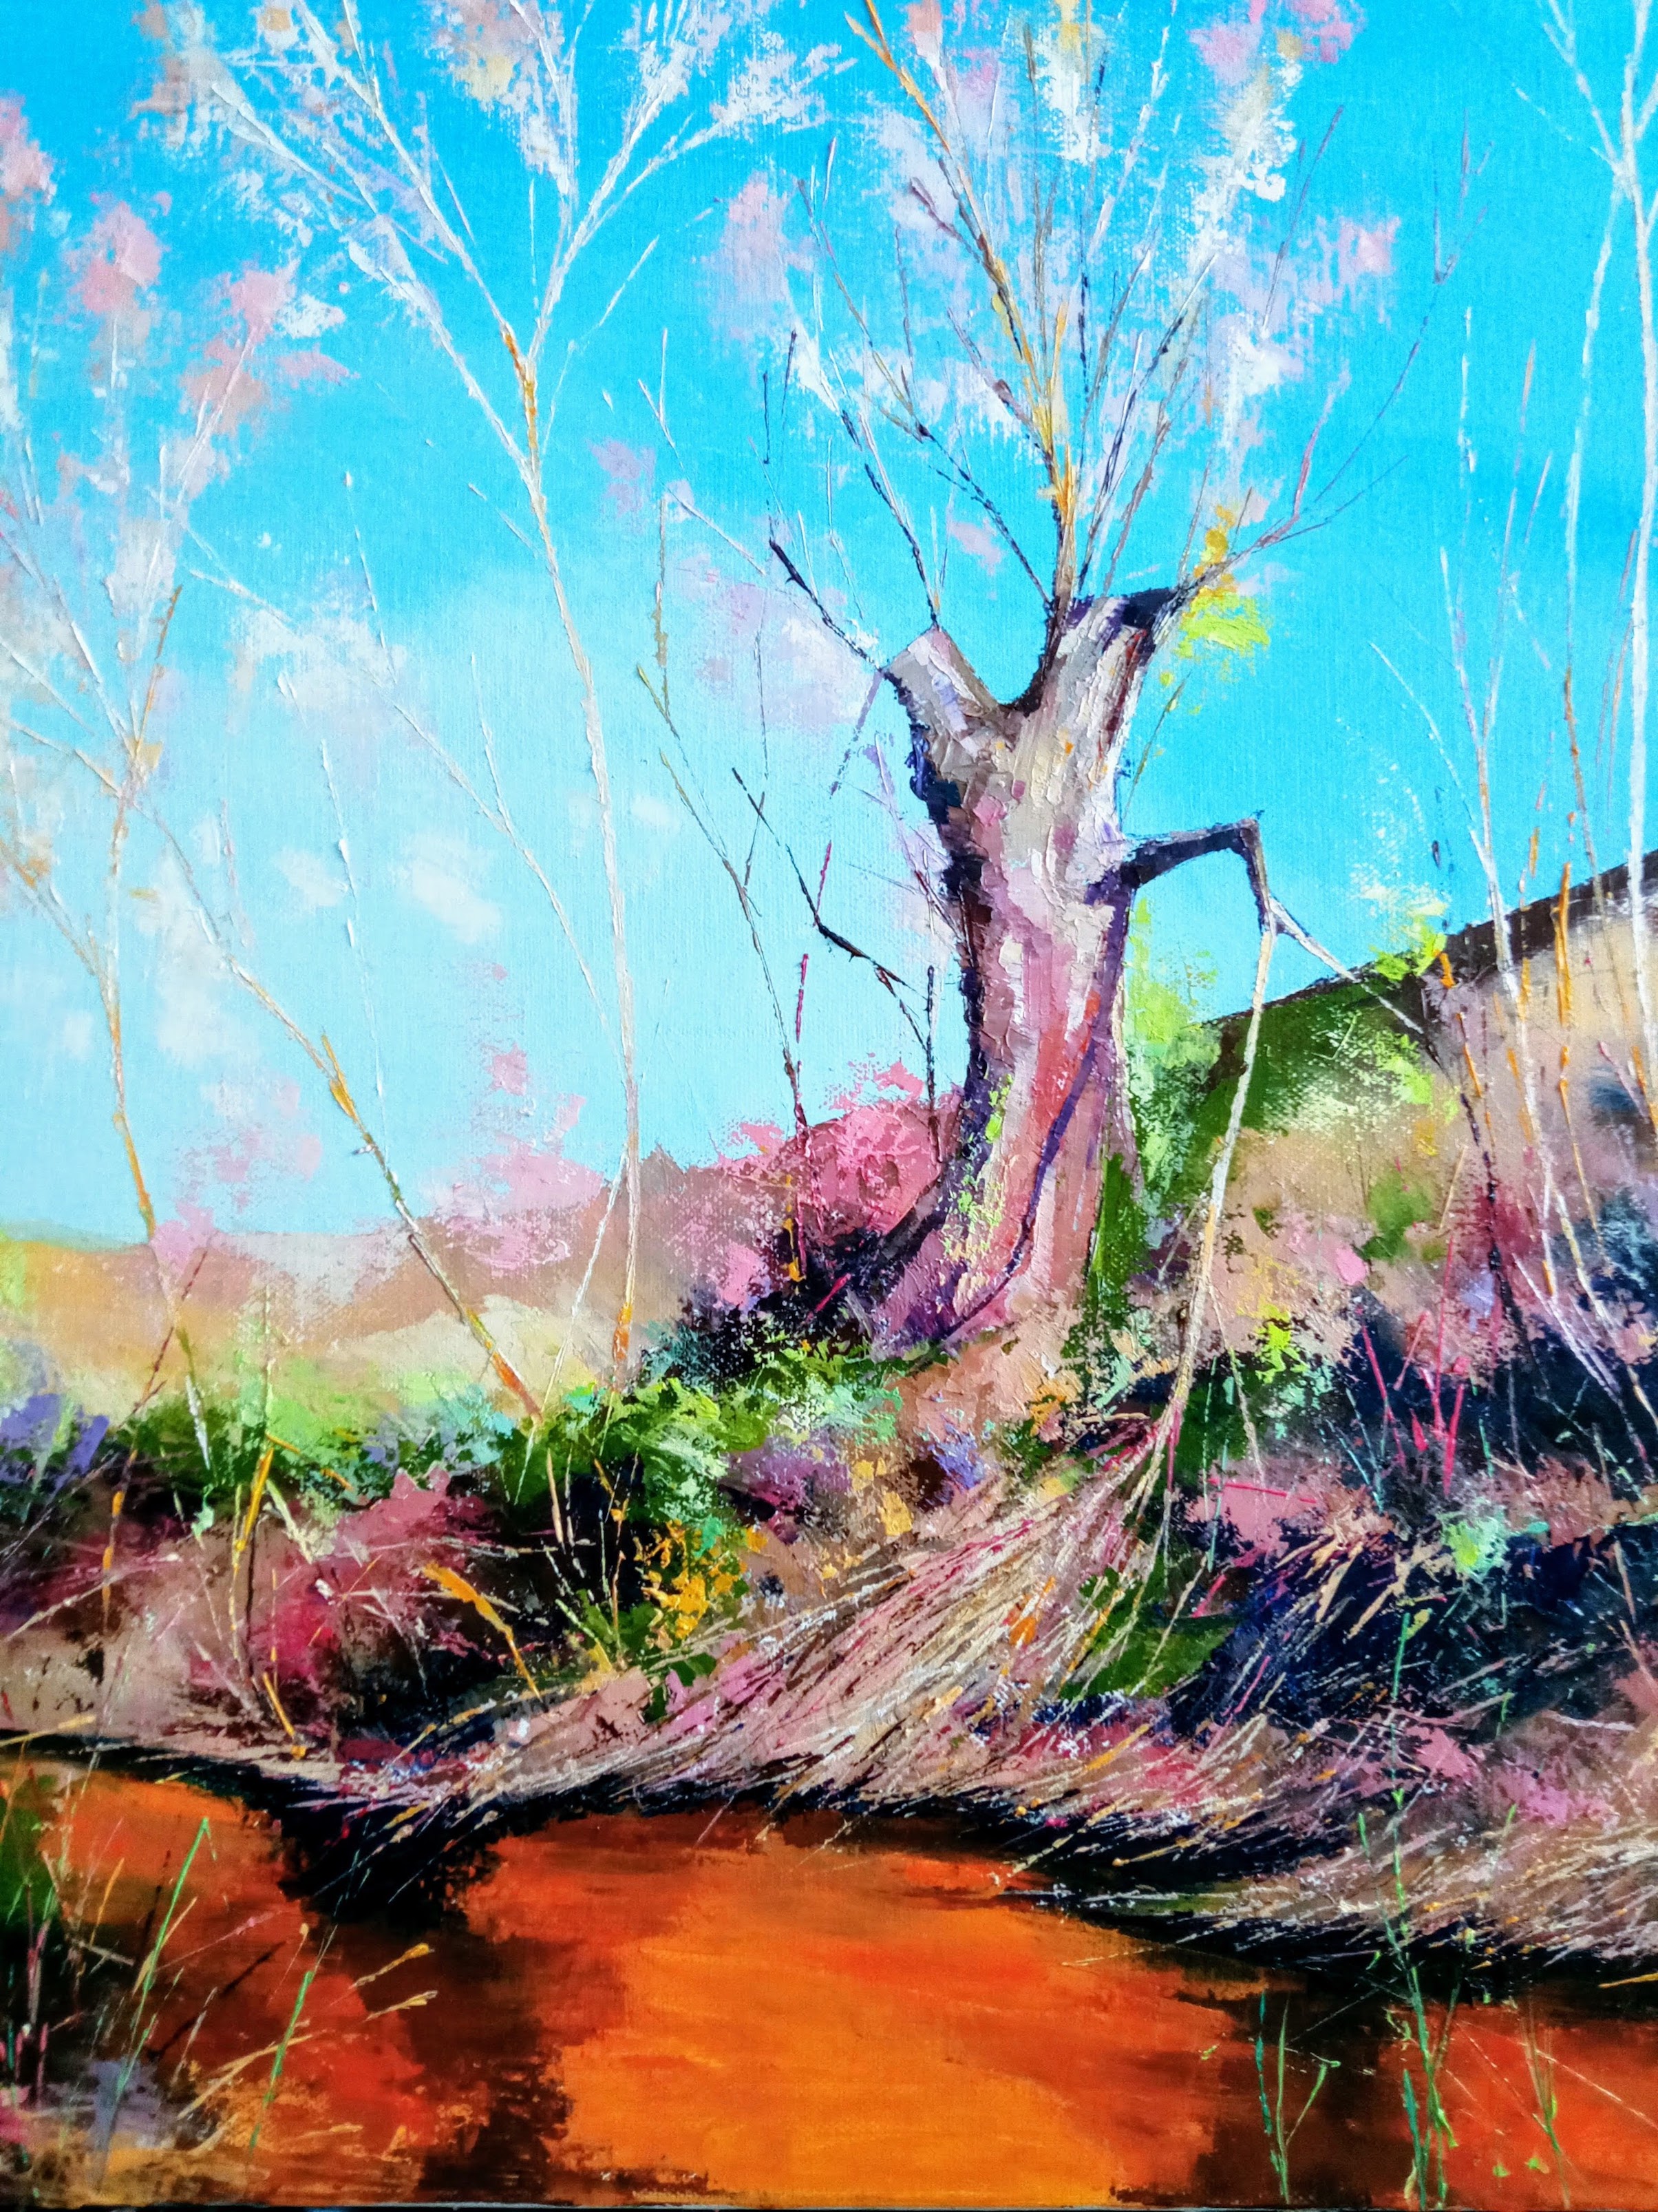 xichen oldtreestump peinture paysage theartcycle photo_principale.jpg The Art Cycle